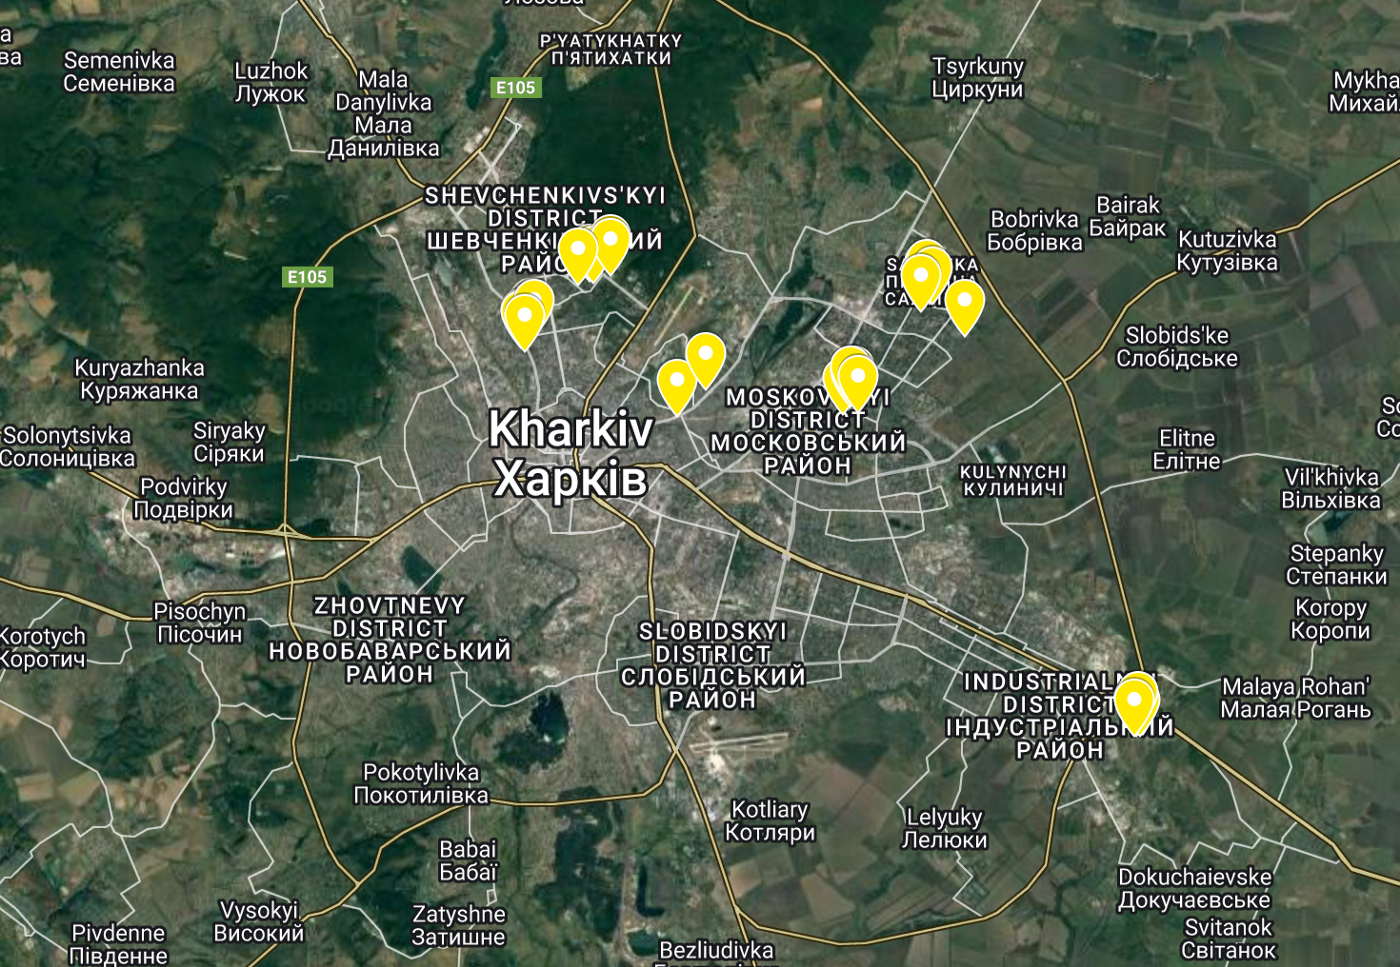 Geolocating Russia’s indiscriminate shelling of Kharkiv